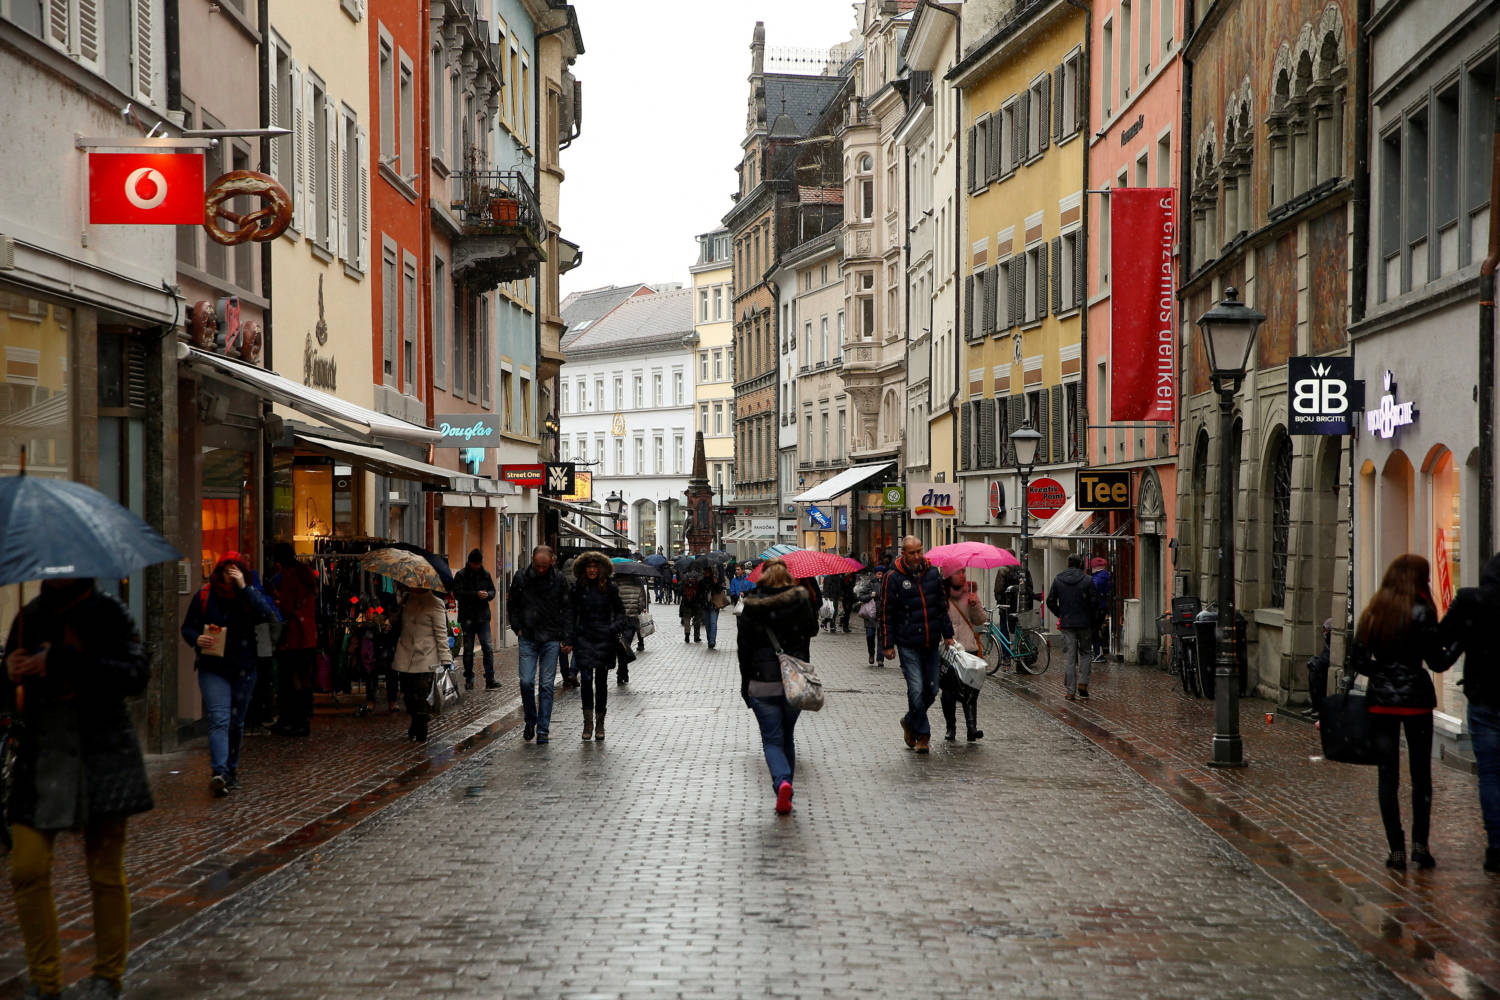 File Photo: People Walk On A Shopping Street In The Southern German Town Of Konstanz